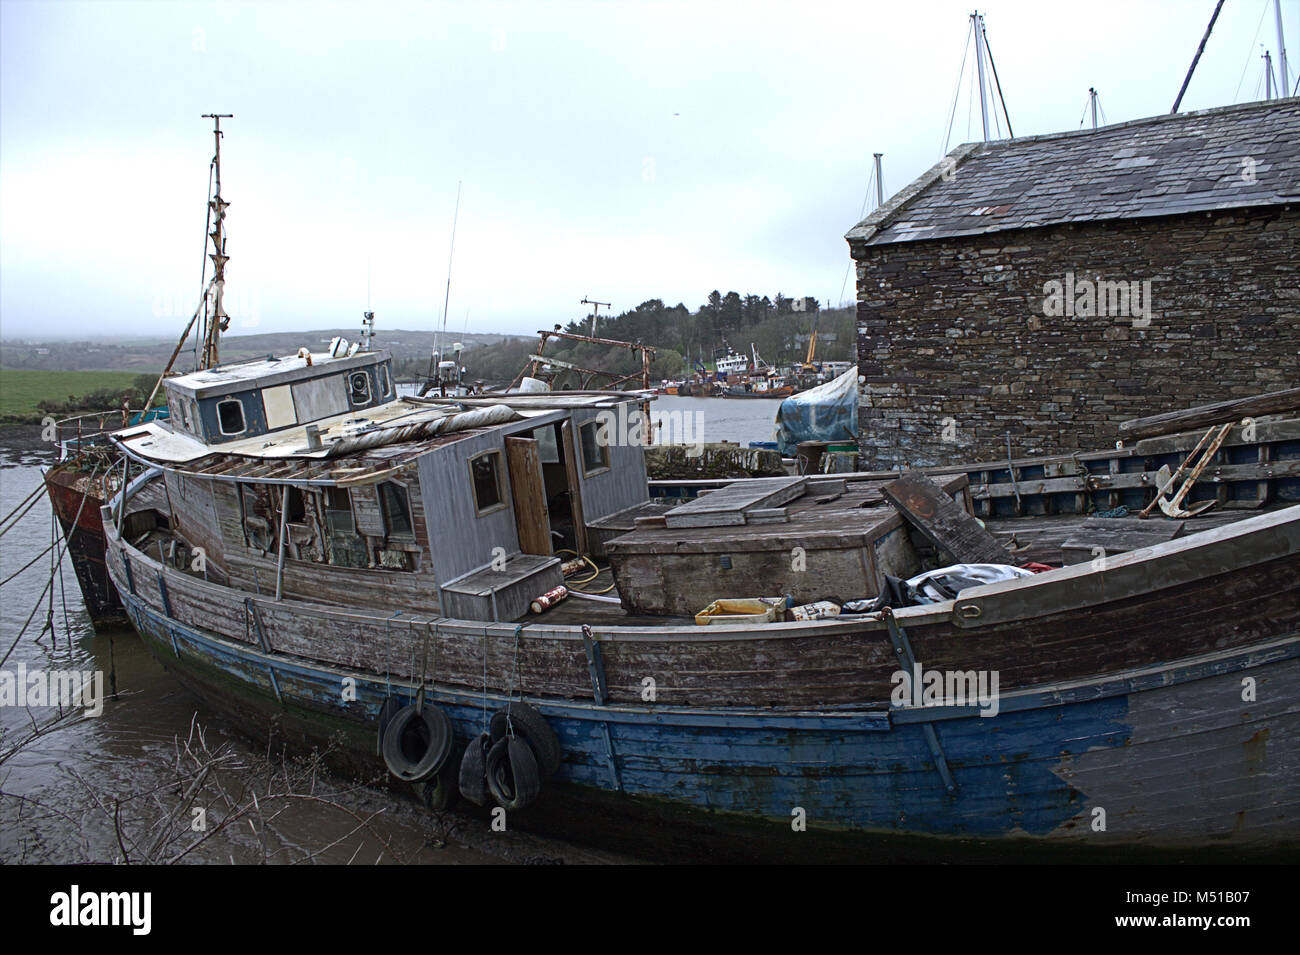 Wooden Boat In Yard Stock Photos &amp; Wooden Boat In Yard ...